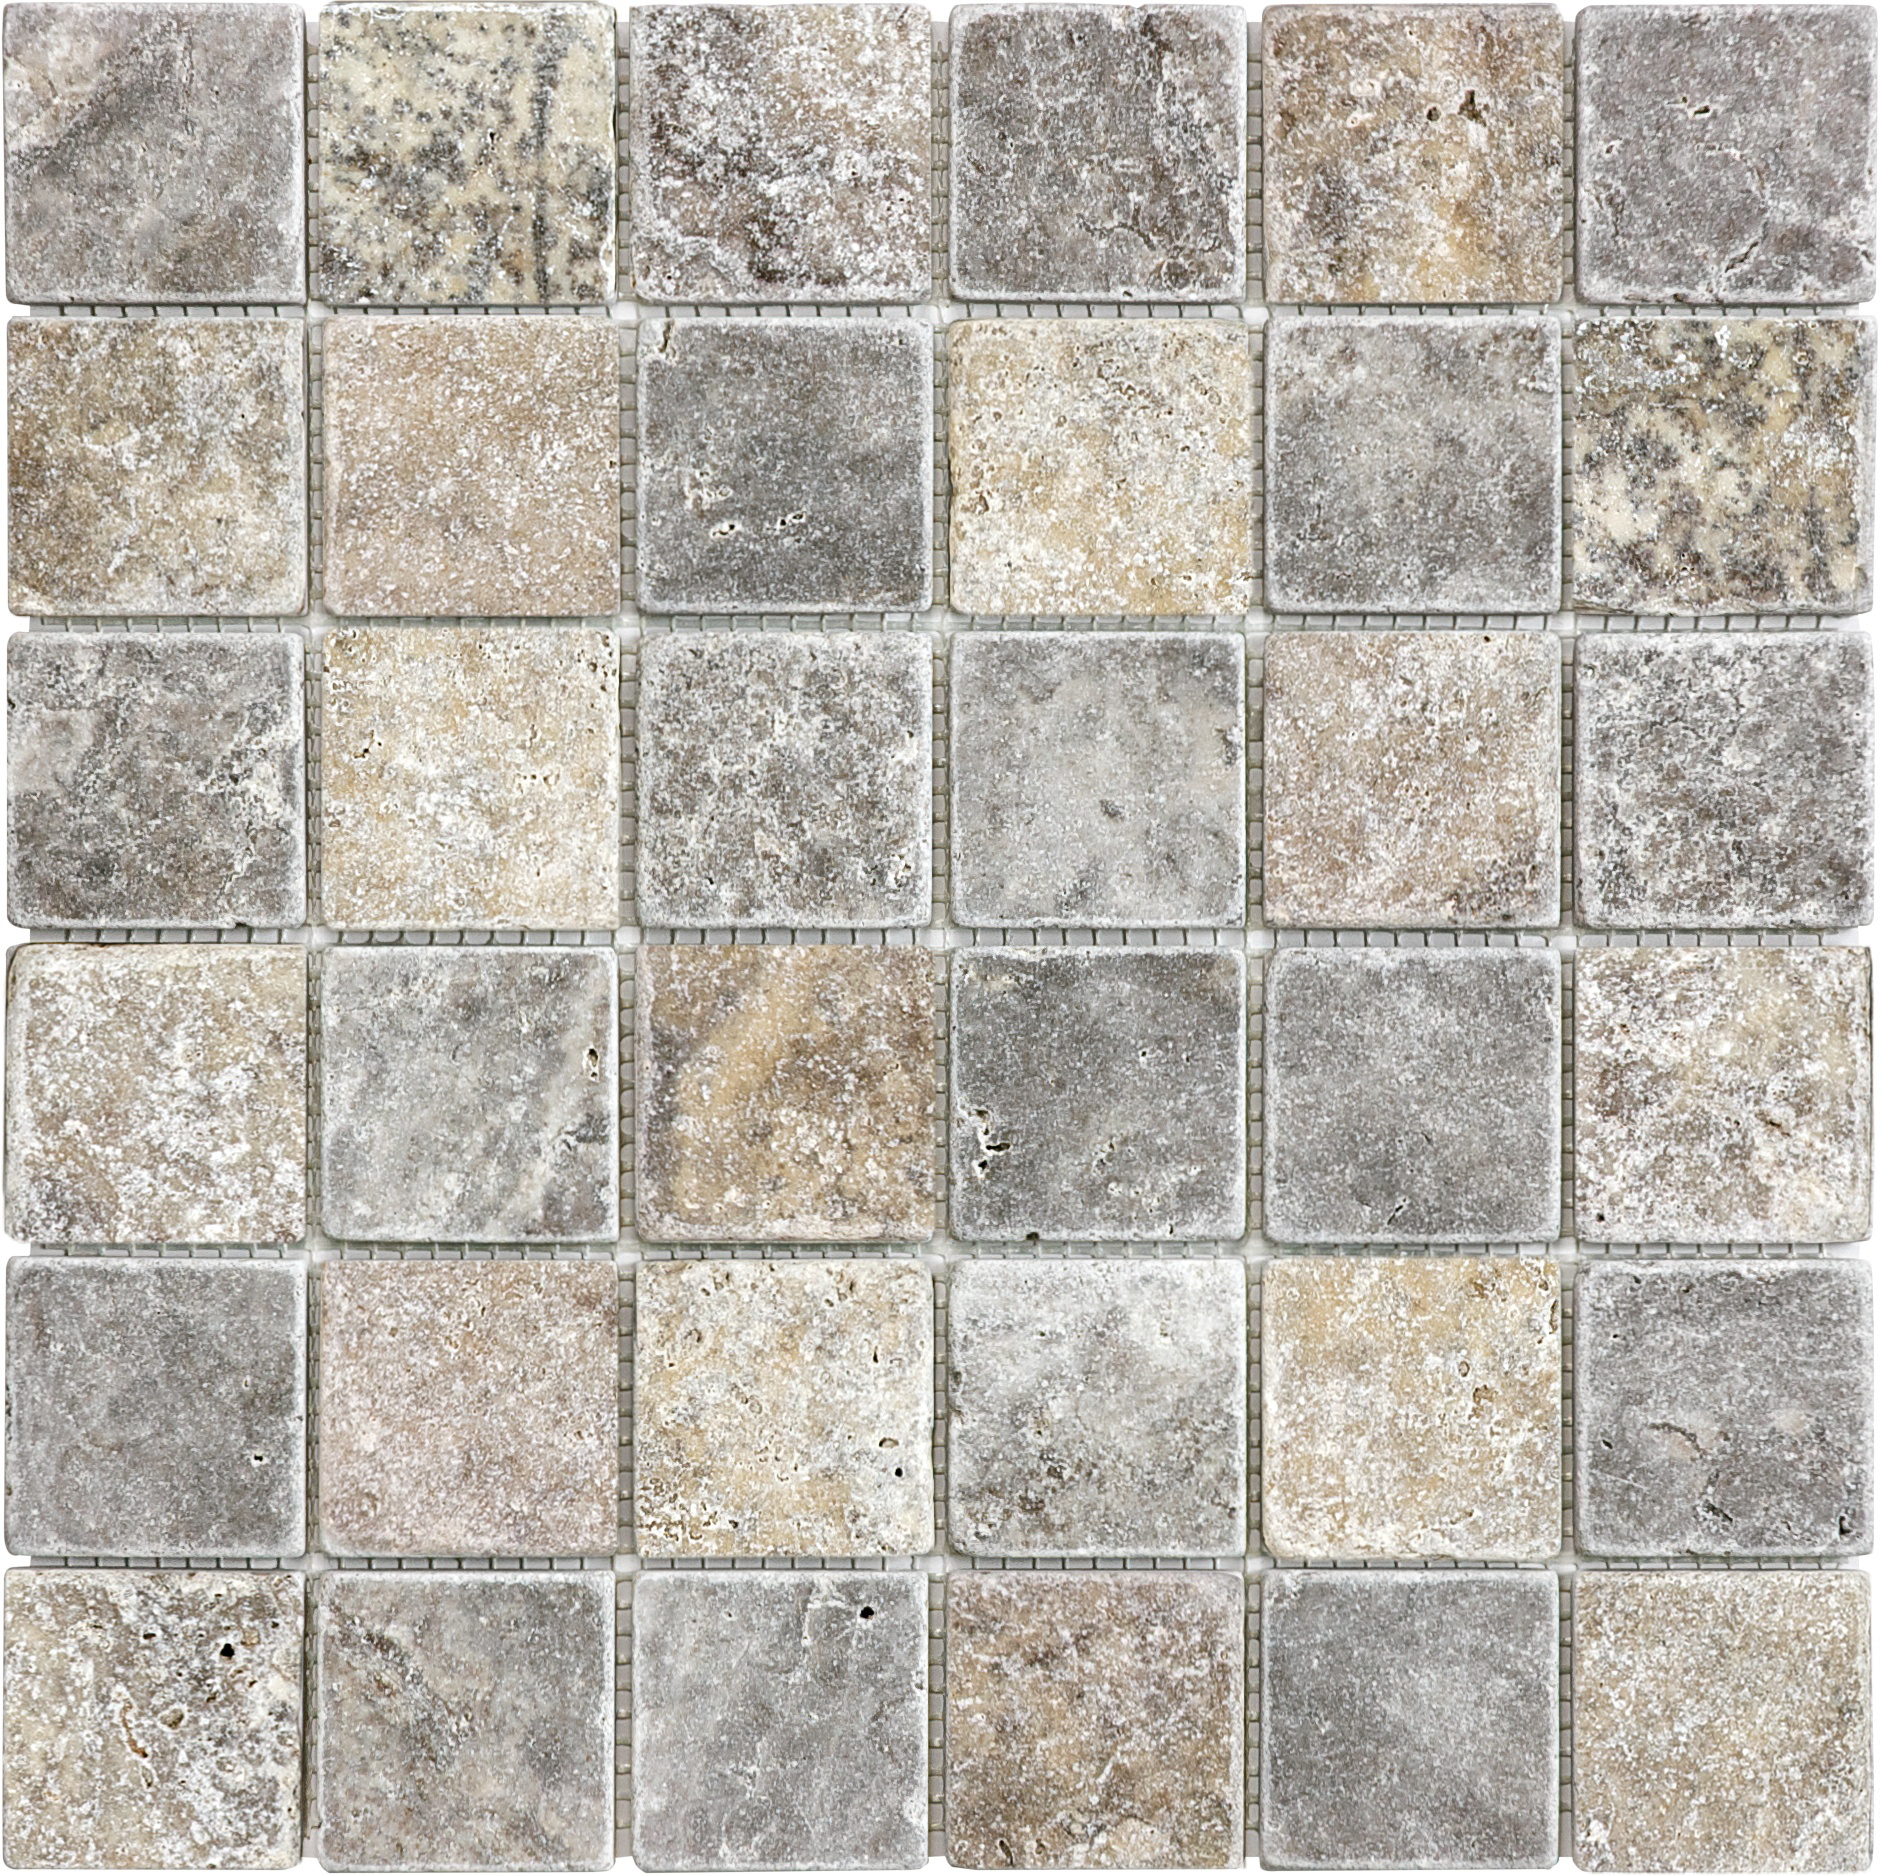 travertine straight stack 2x2-inch pattern natural stone mosaic from silver ash anatolia collection distributed by surface group international tumbled finish tumbled edge mesh shape